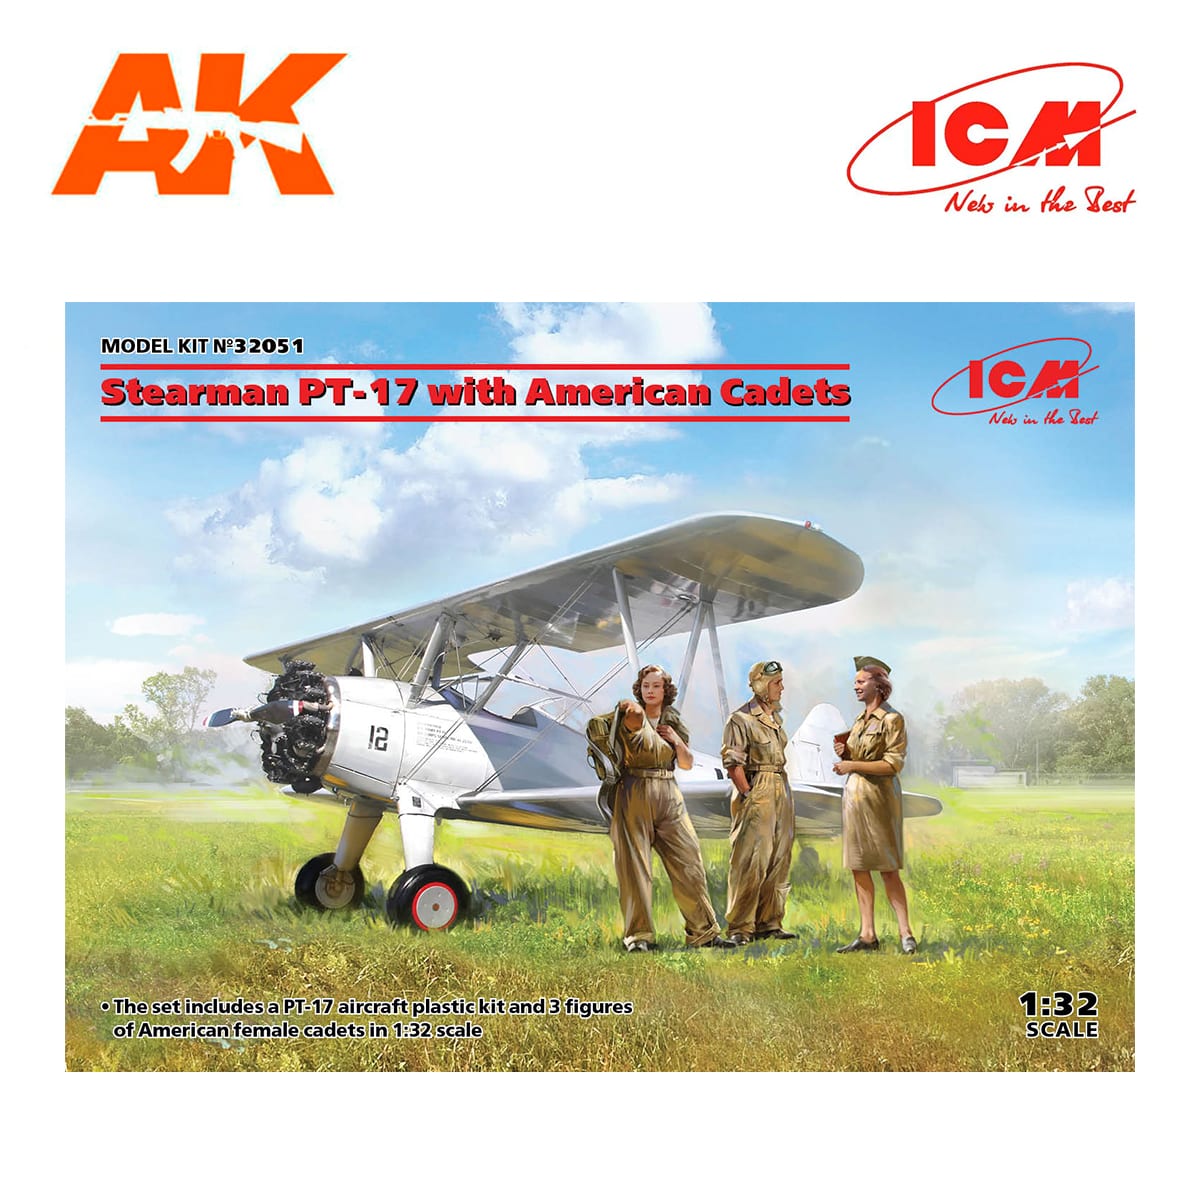 Stearman PT-17 with American Cadets 1/32